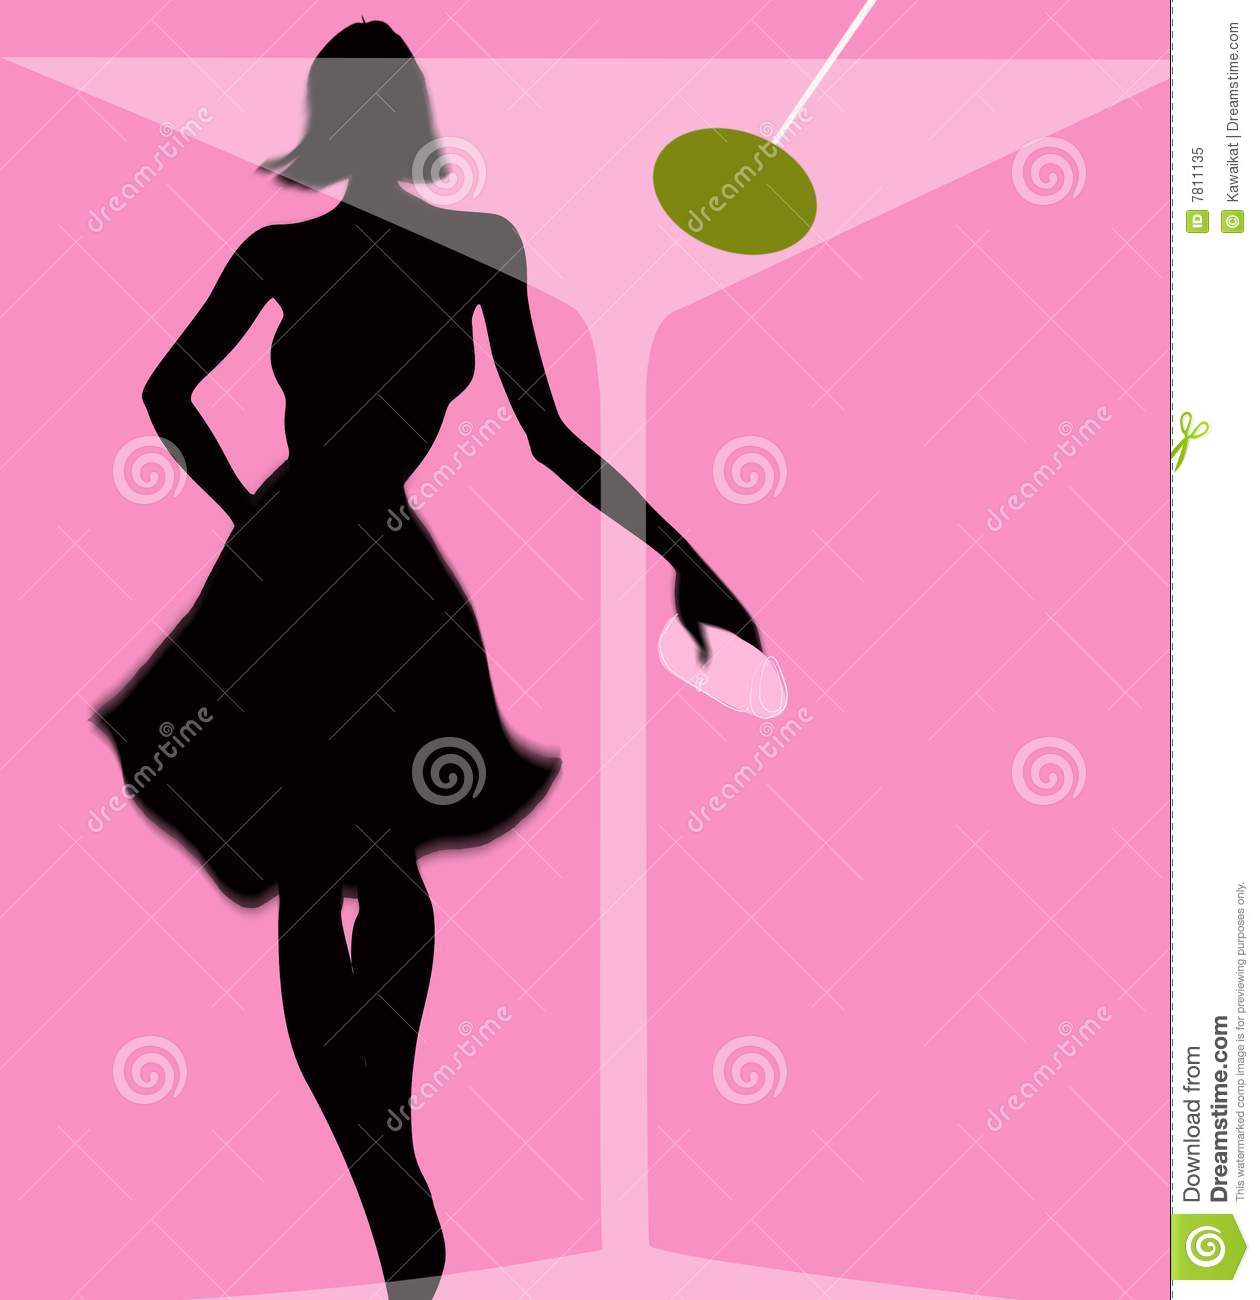 Woman Behind Martini Glass With Olive Royalty Free Stock Photo   Image